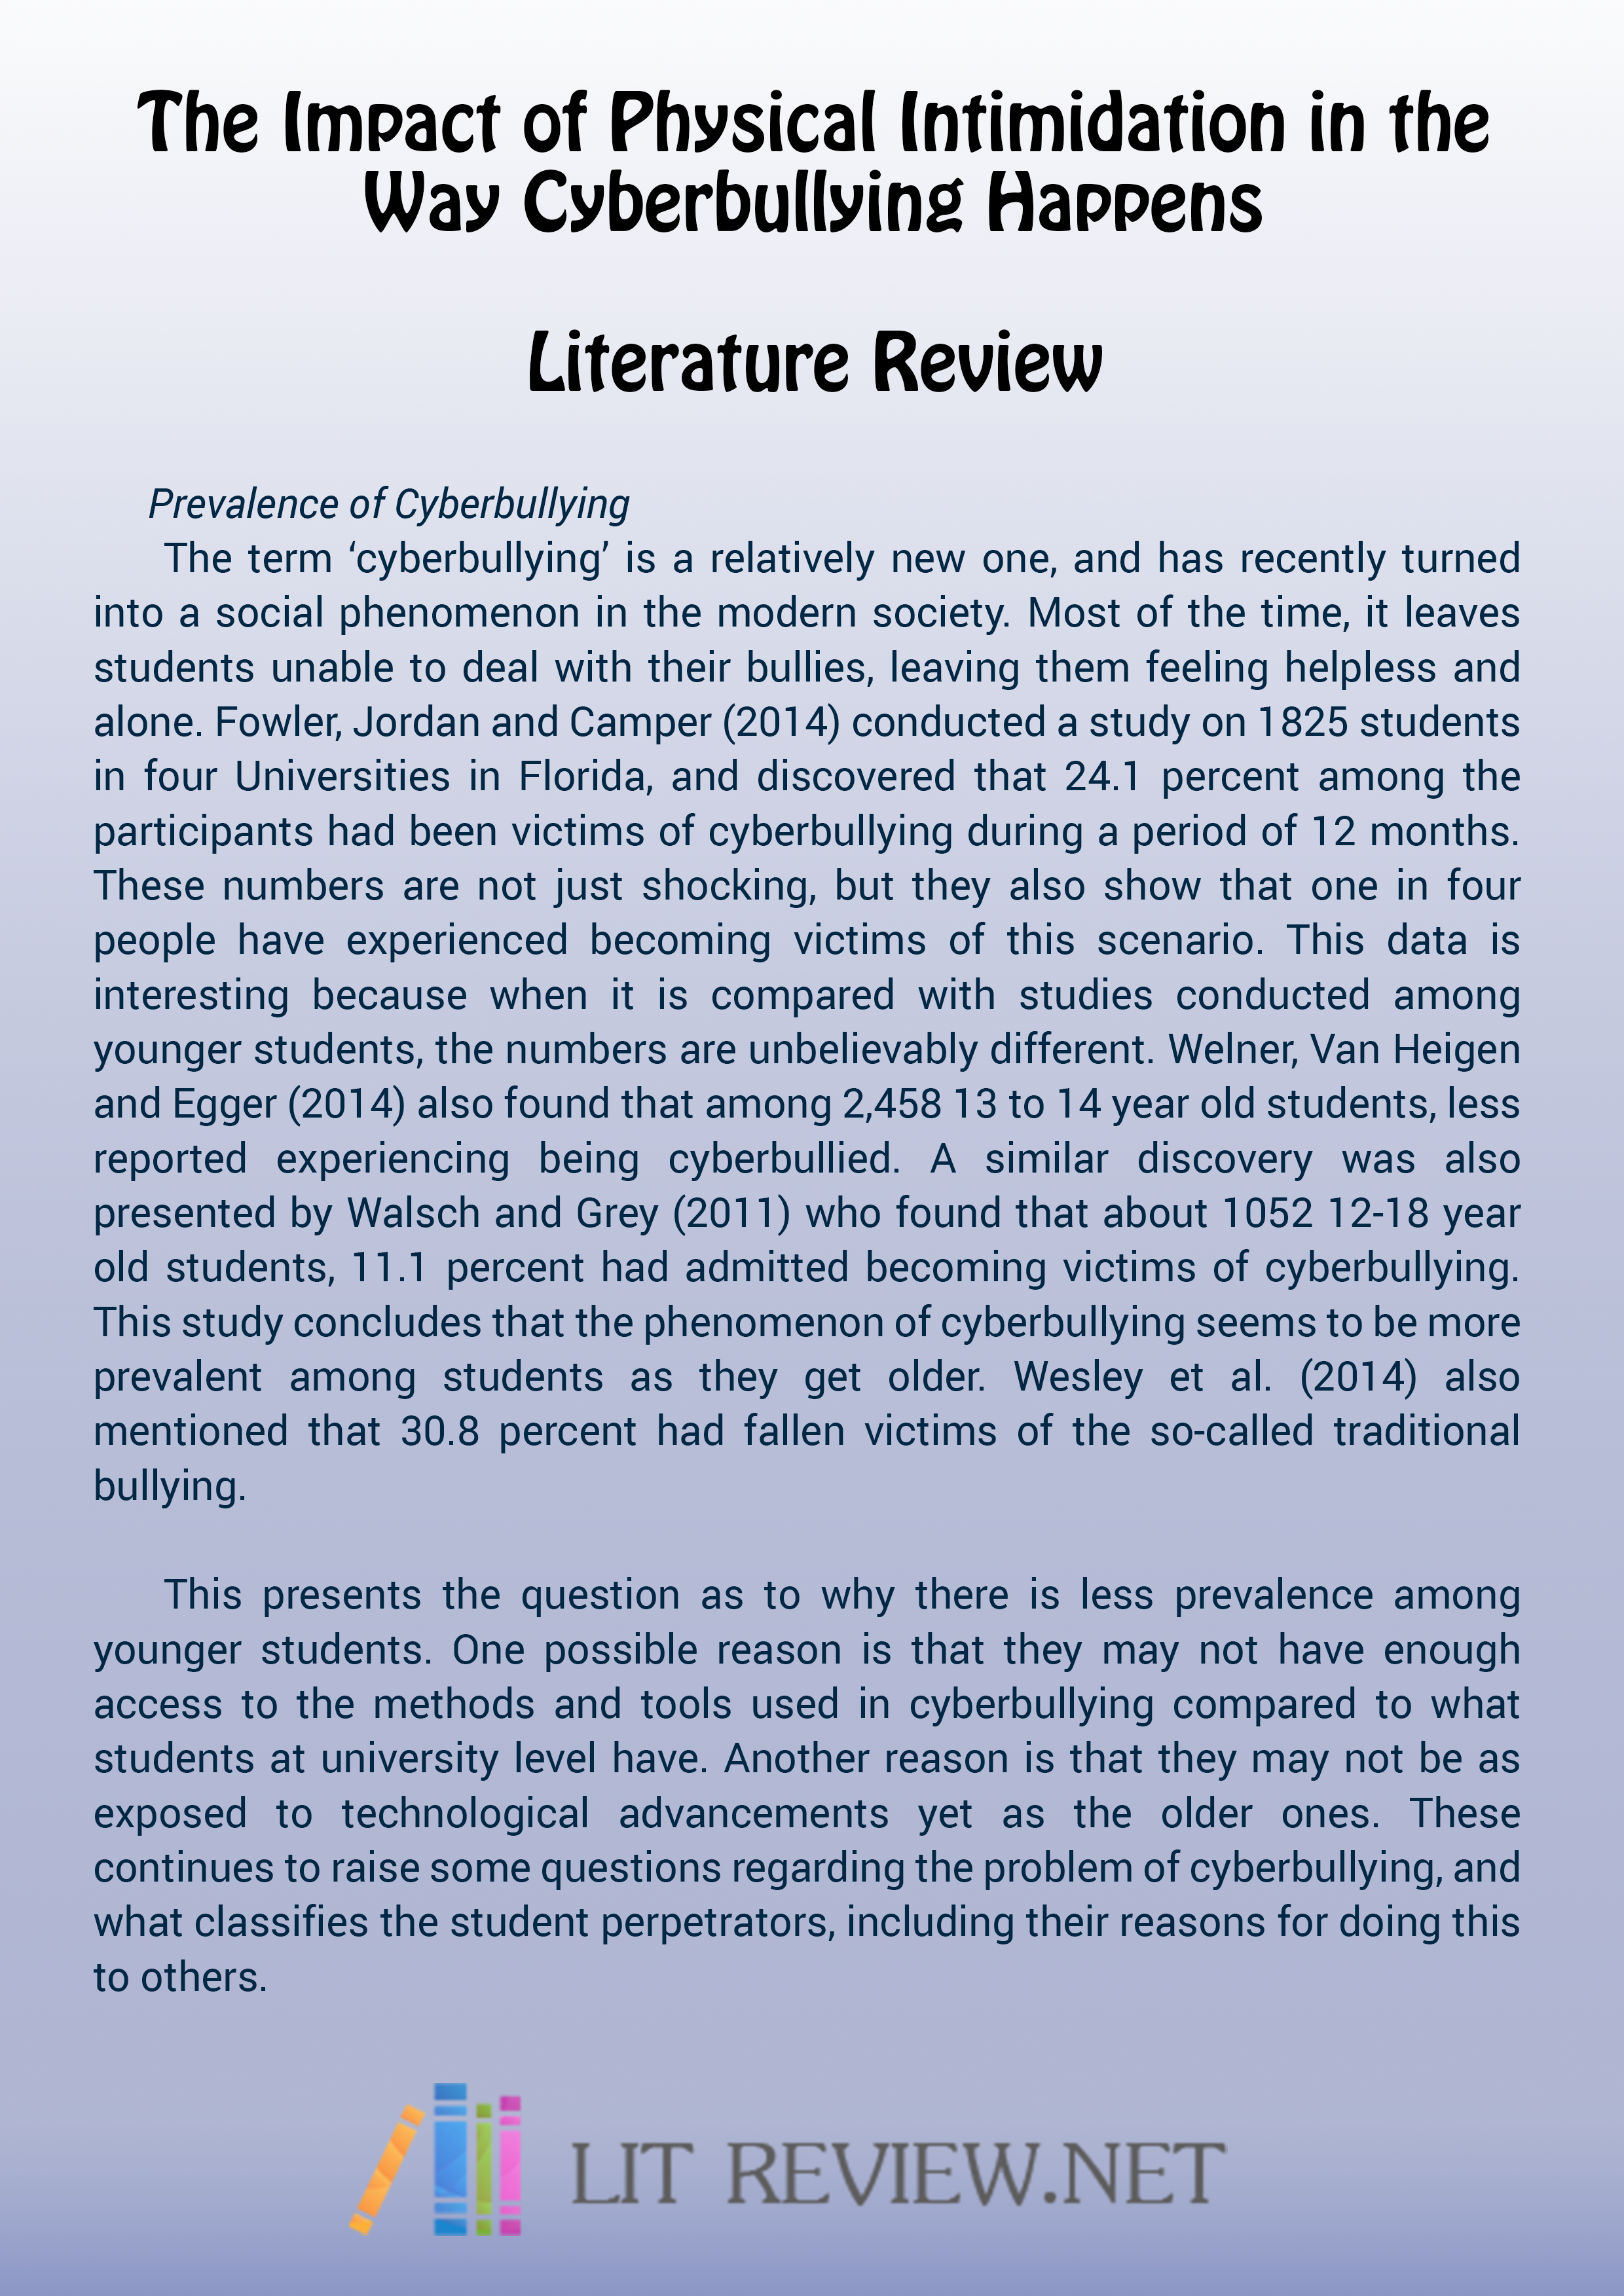 How to write a literature review for a dissertation